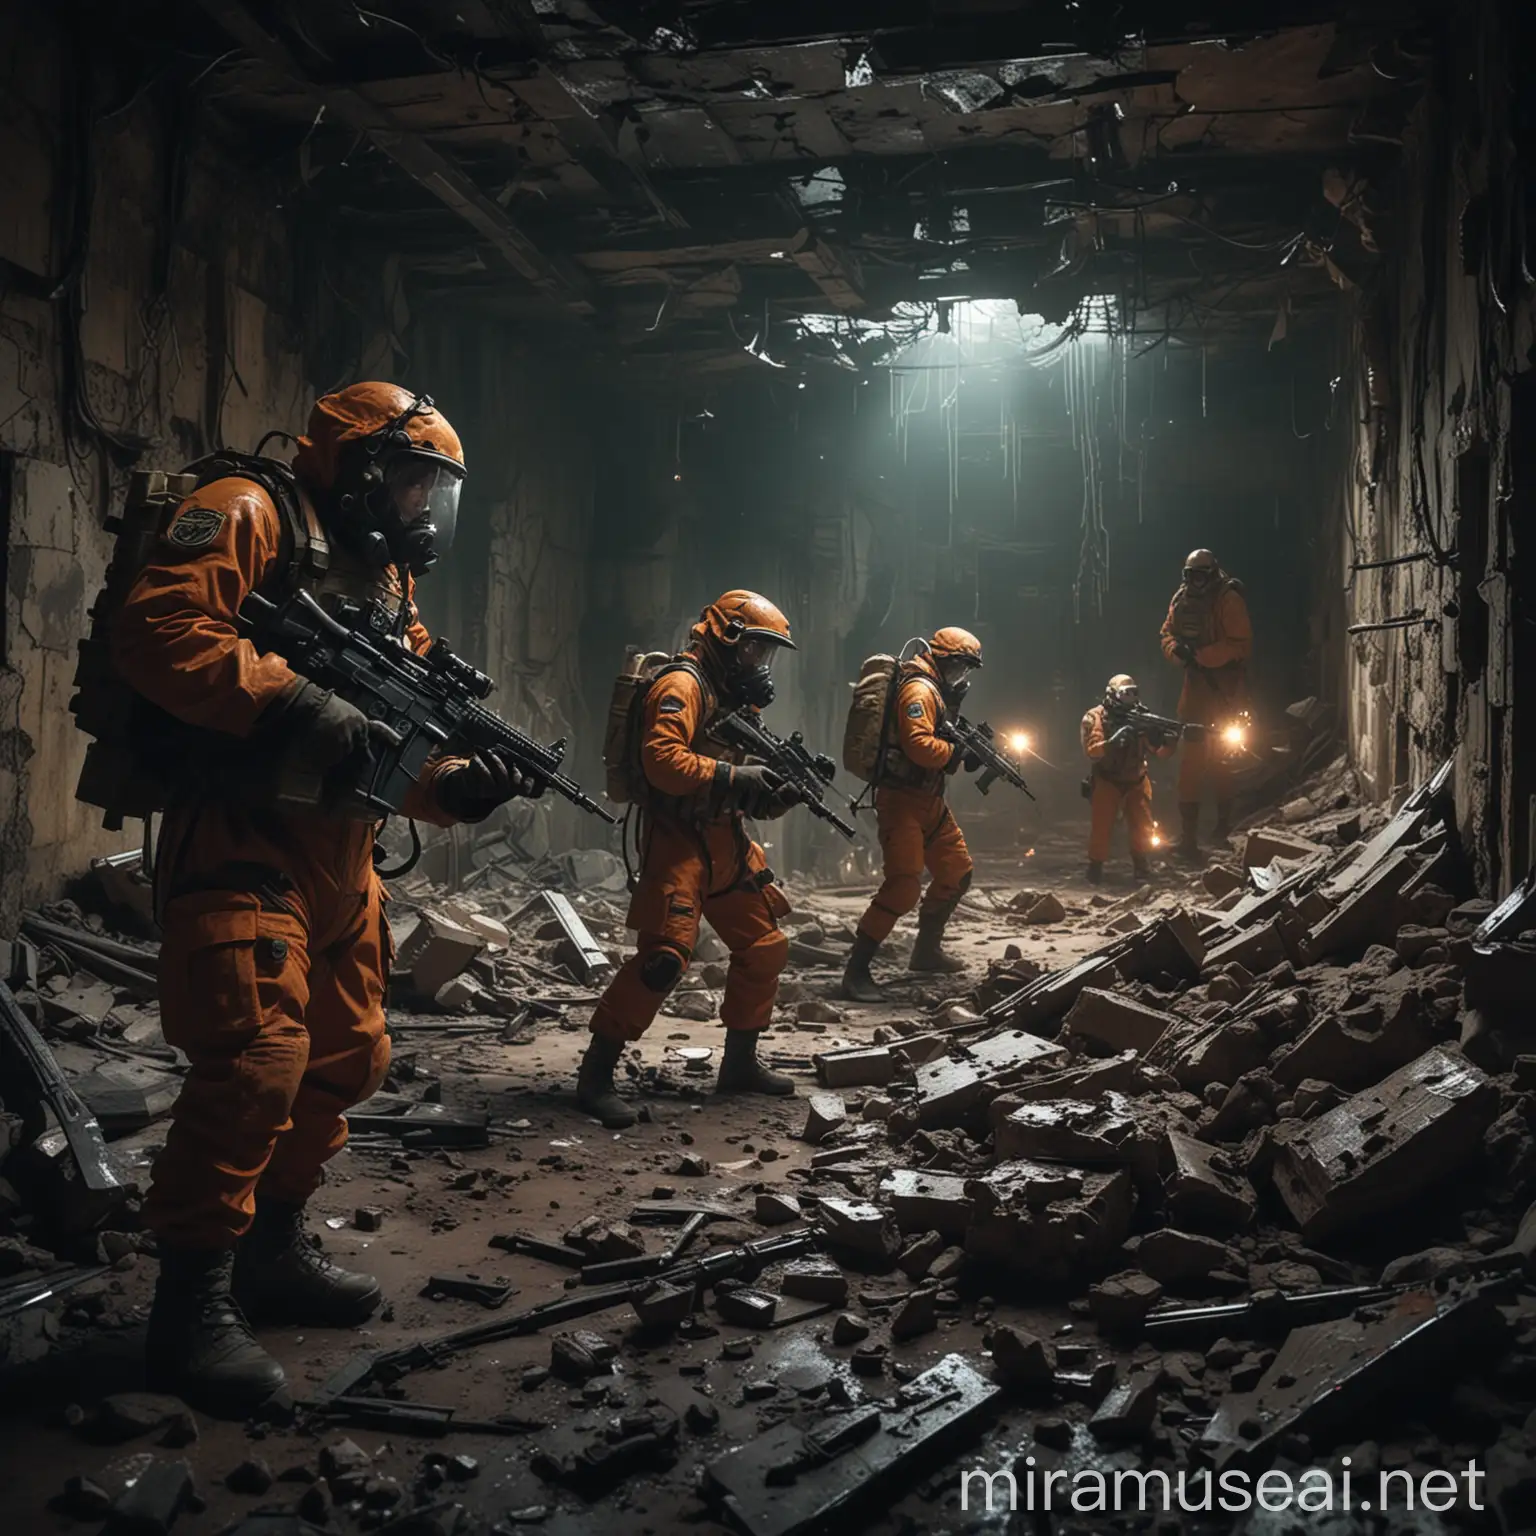 Exploring Cracked Ancient Laboratory Ruins with Soldiers in Hazmat Suits